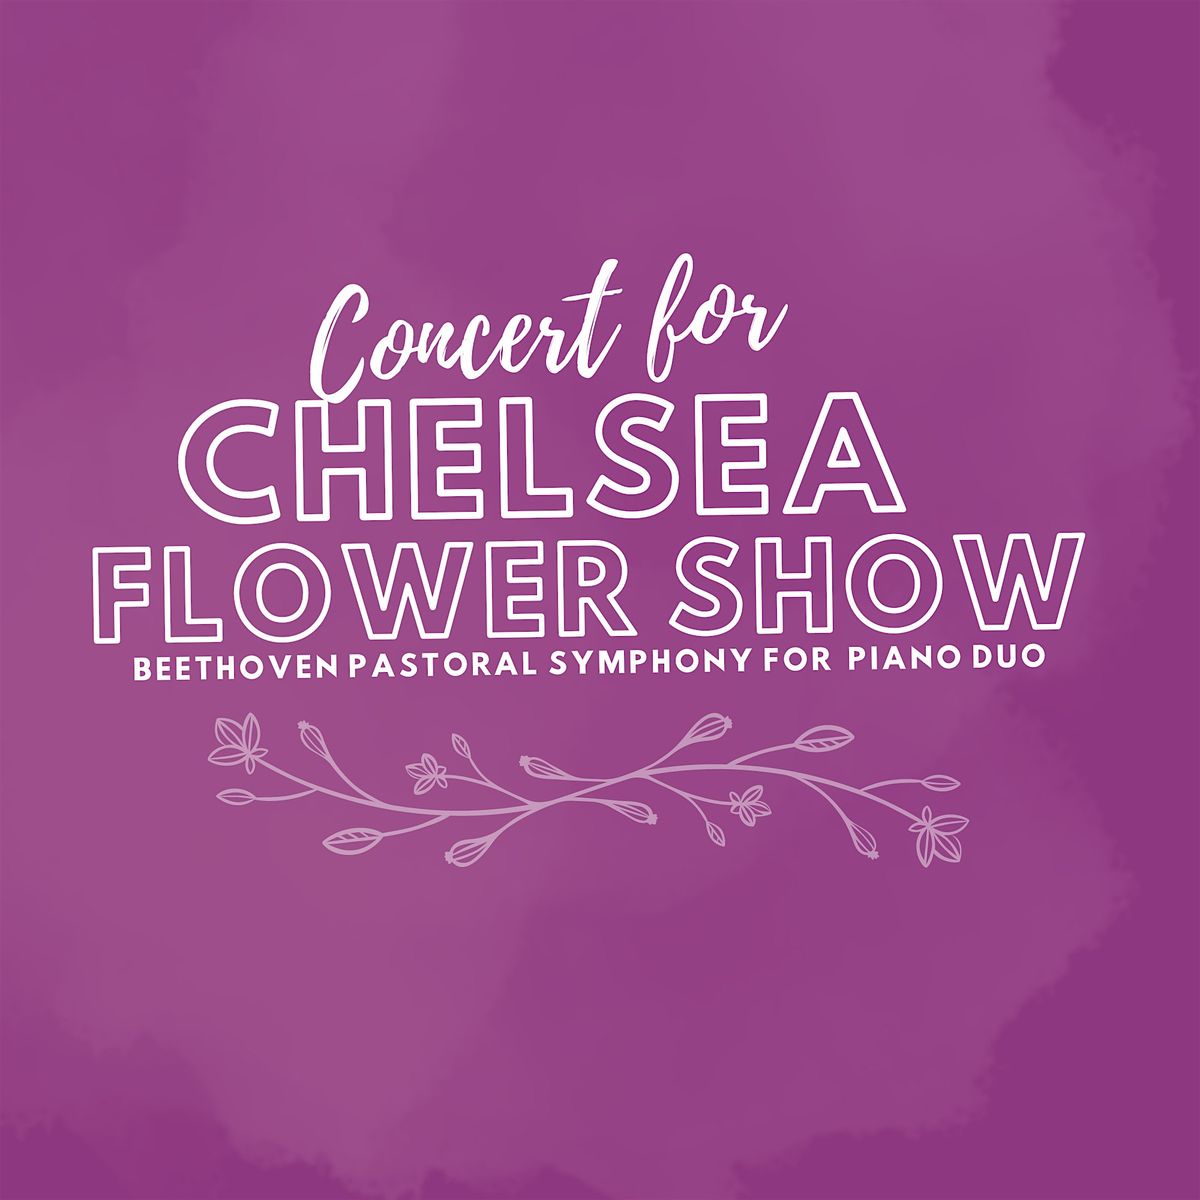 Concert for Chelsea Flower Show: Beethoven Pastoral Symphony for piano duo